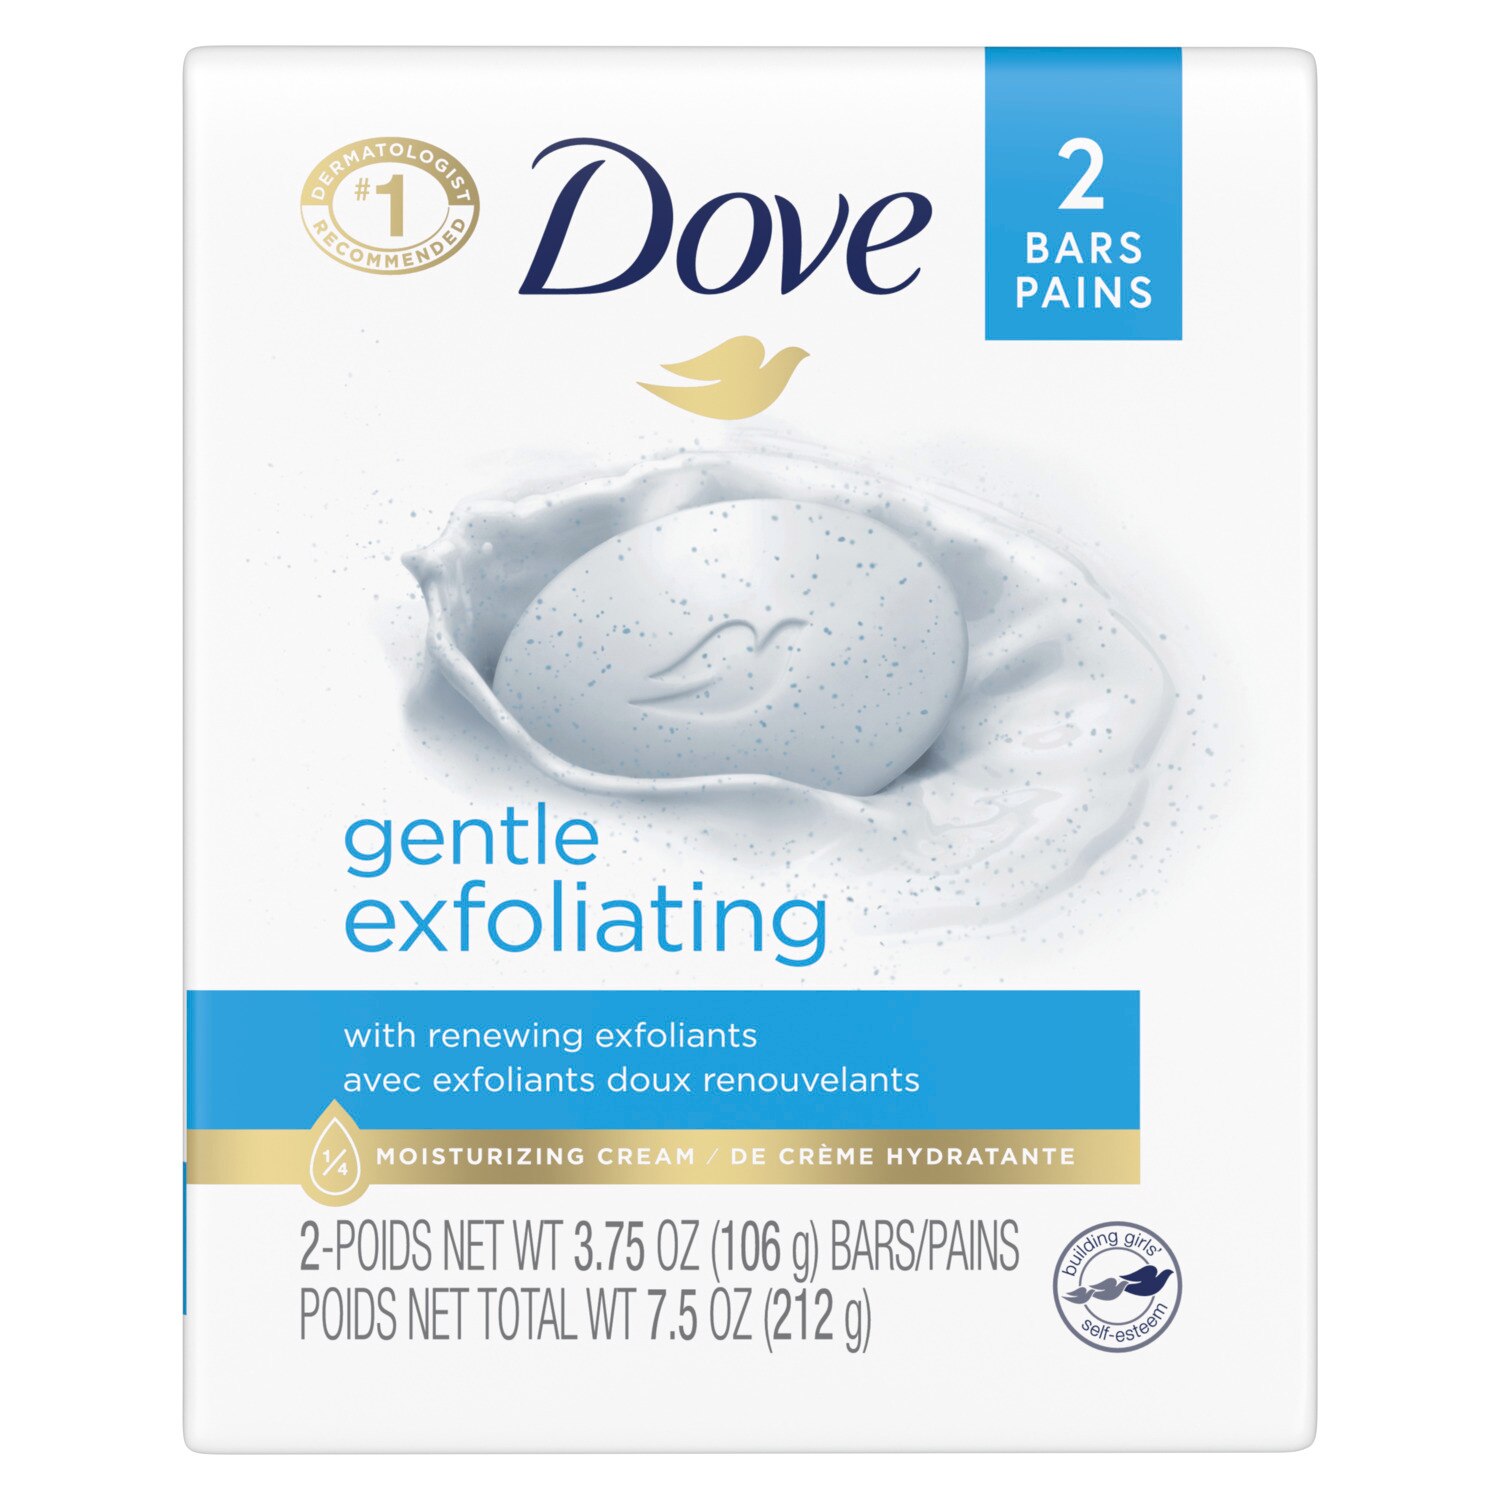 Dove More Moisturizing Than Bar Soap Gentle Exfoliating Beauty Bar for Softer Skin, 3.75 OZ